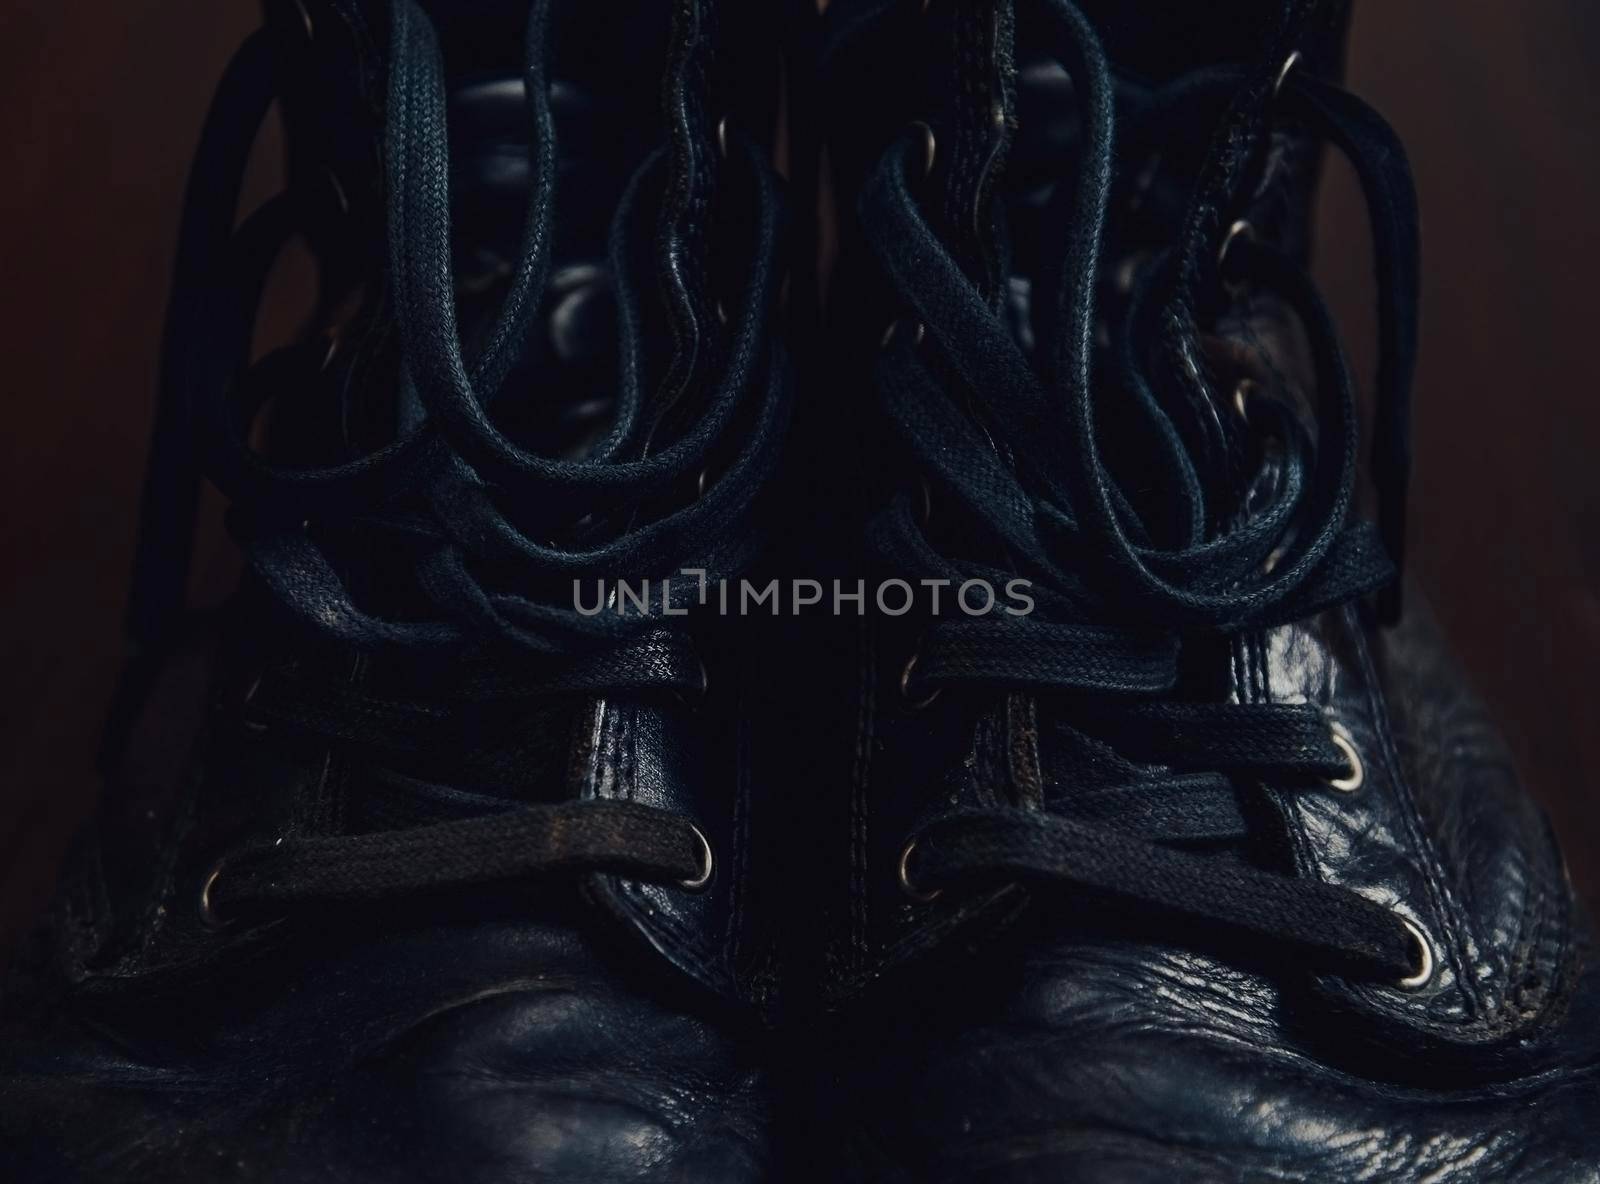 Black leather boots with shoelaces, close-up